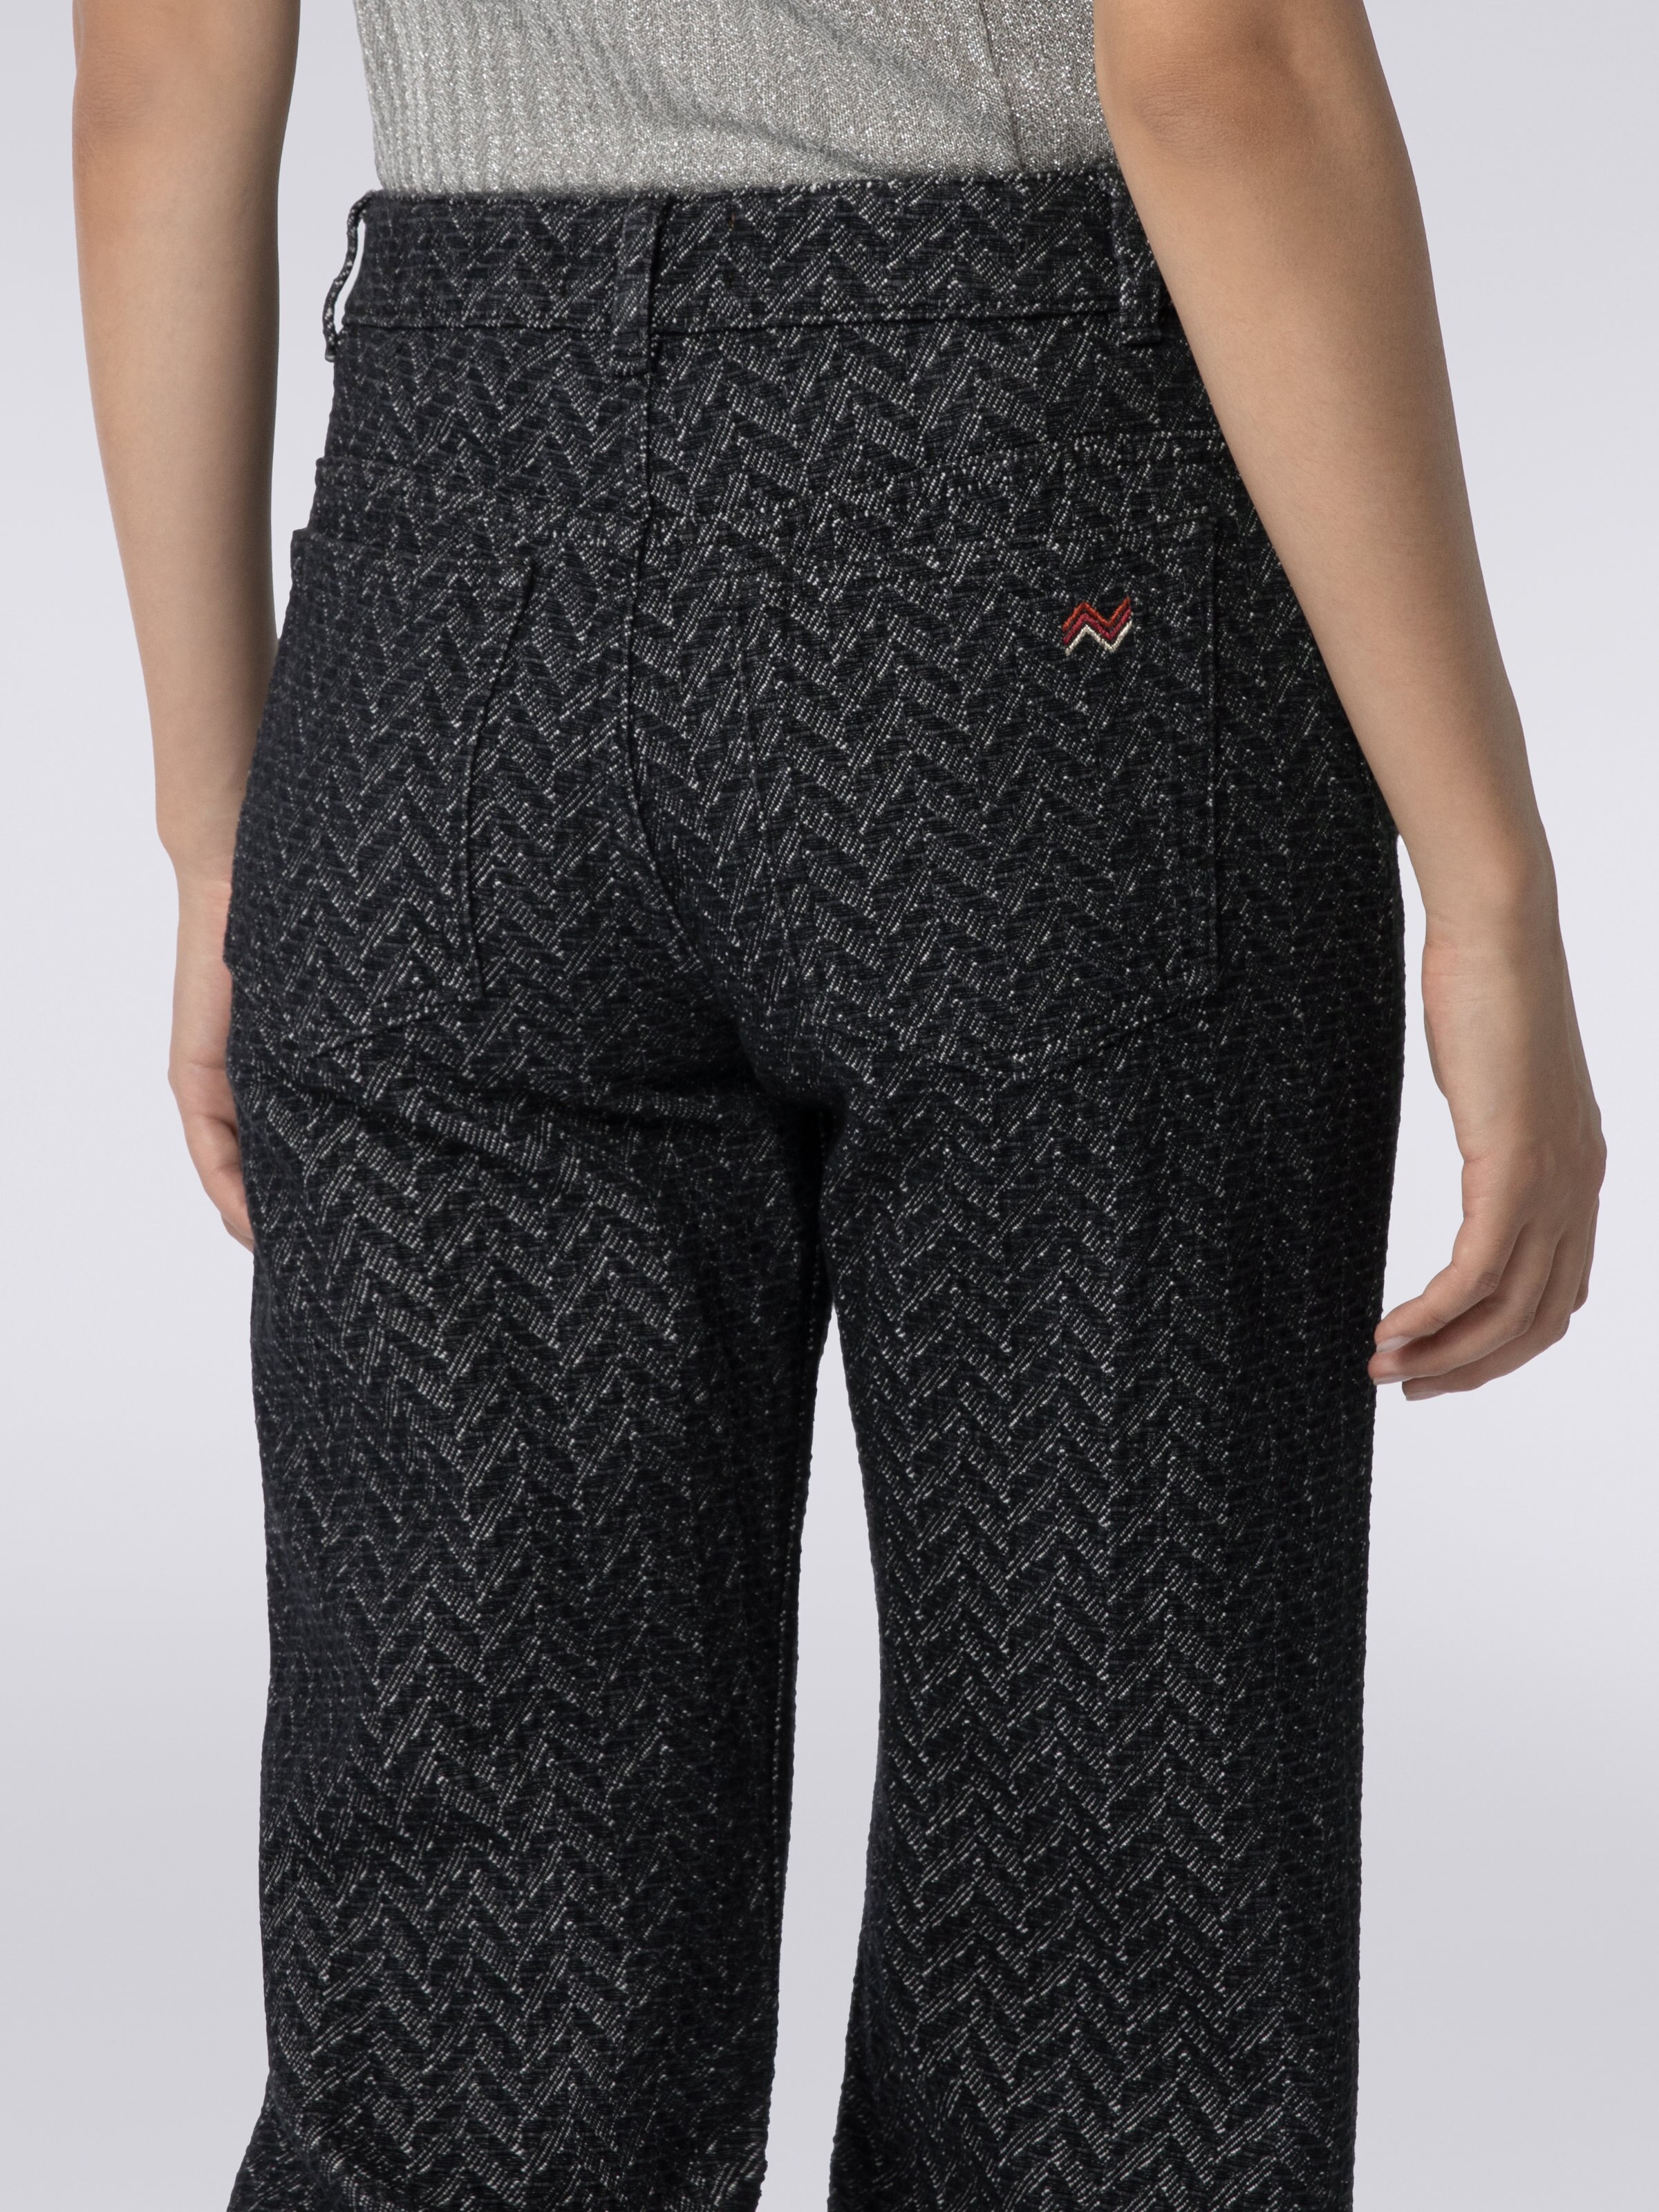 Five-pocket cotton trousers with zigzag pattern and embroidery on the back pocket  , Black    - 4